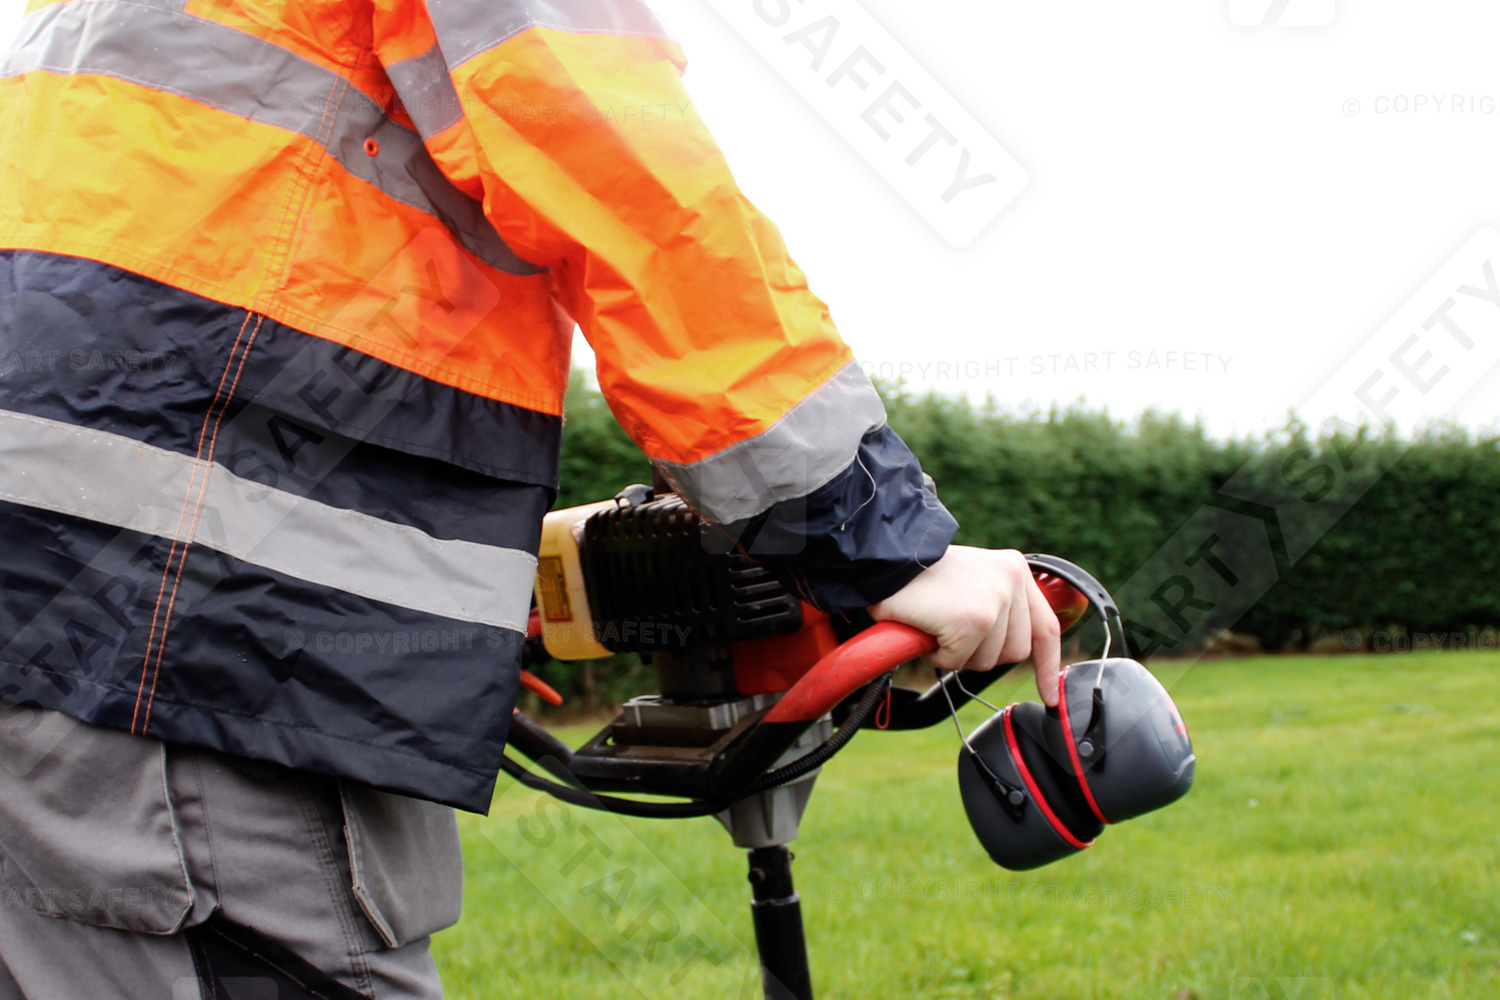 Sonis 3 ear defenders Head Band in use with site equipment